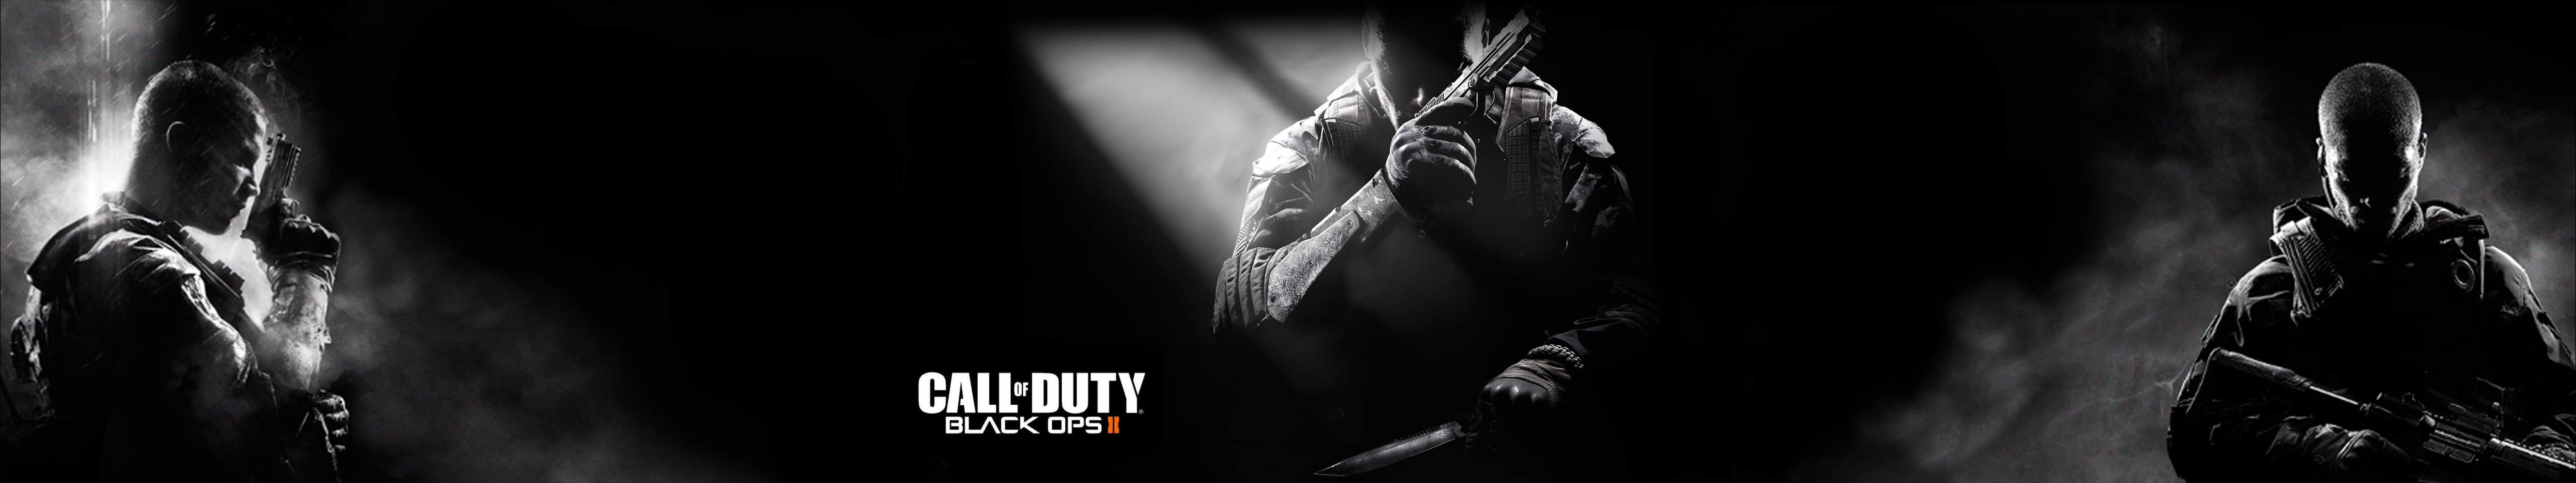 Black Ops Monitor Wallpaper By Stomp442 Customization